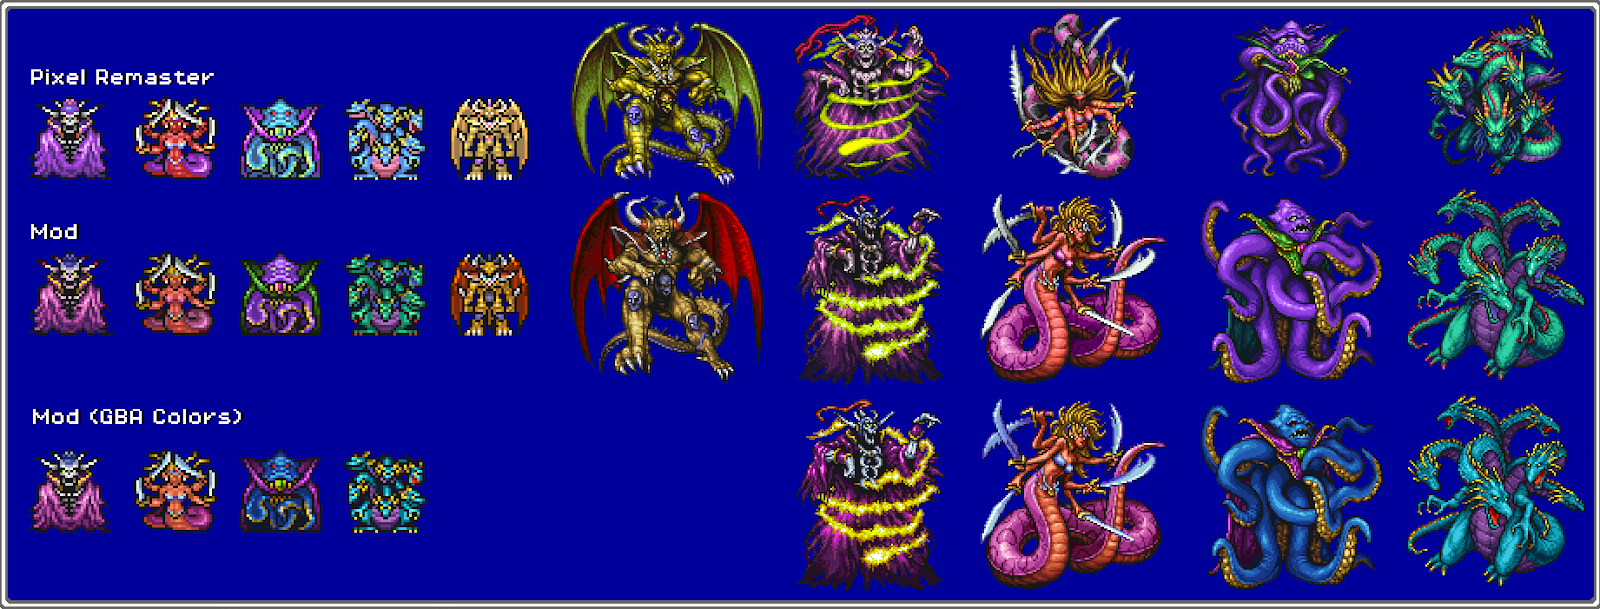 FF1: Complete Modding Guide and Index image 372